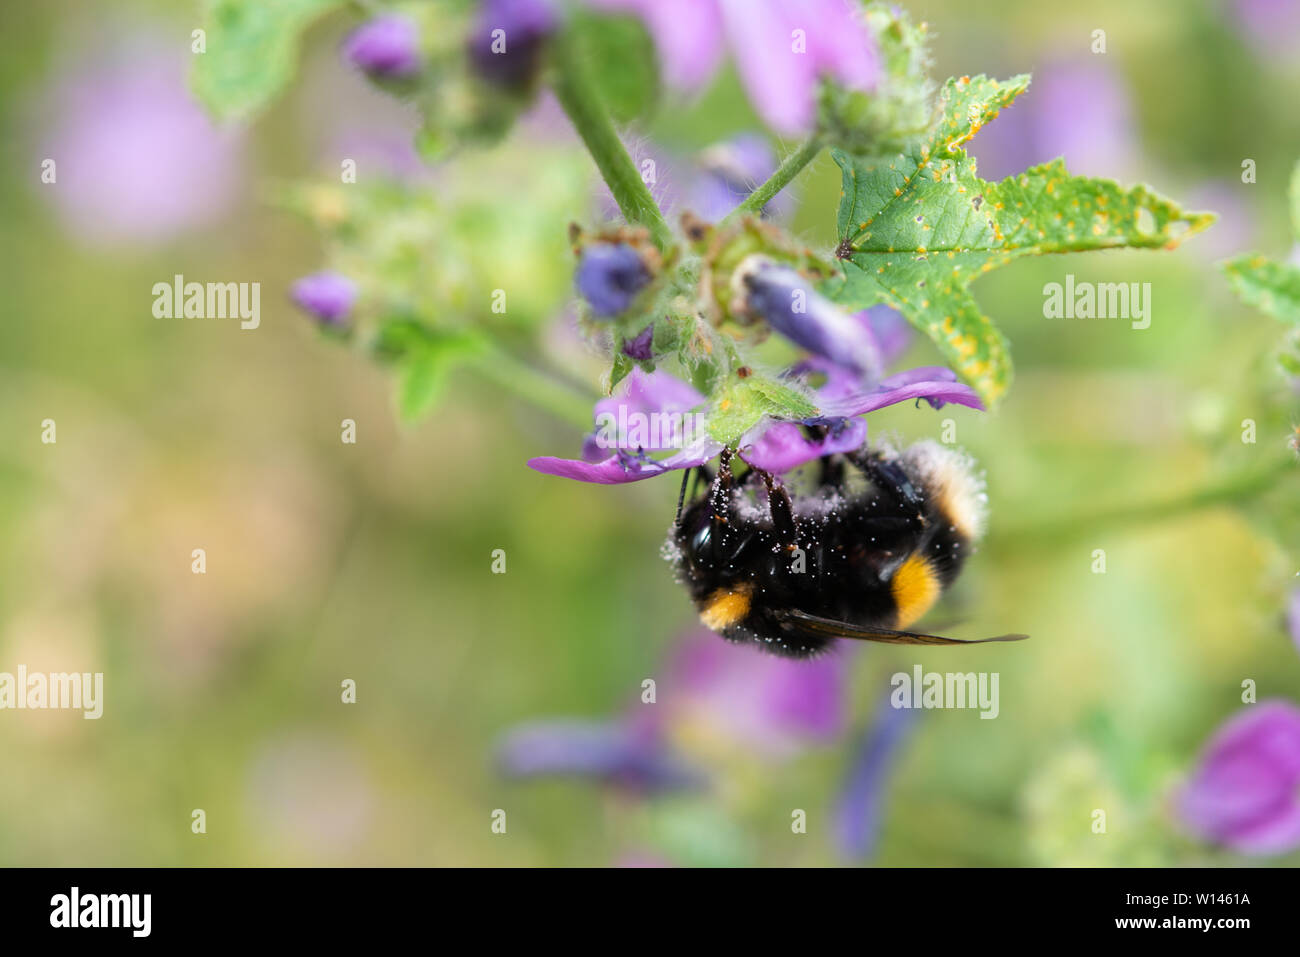 Close up photo of a bee collecting pollen from plant. Stock Photo